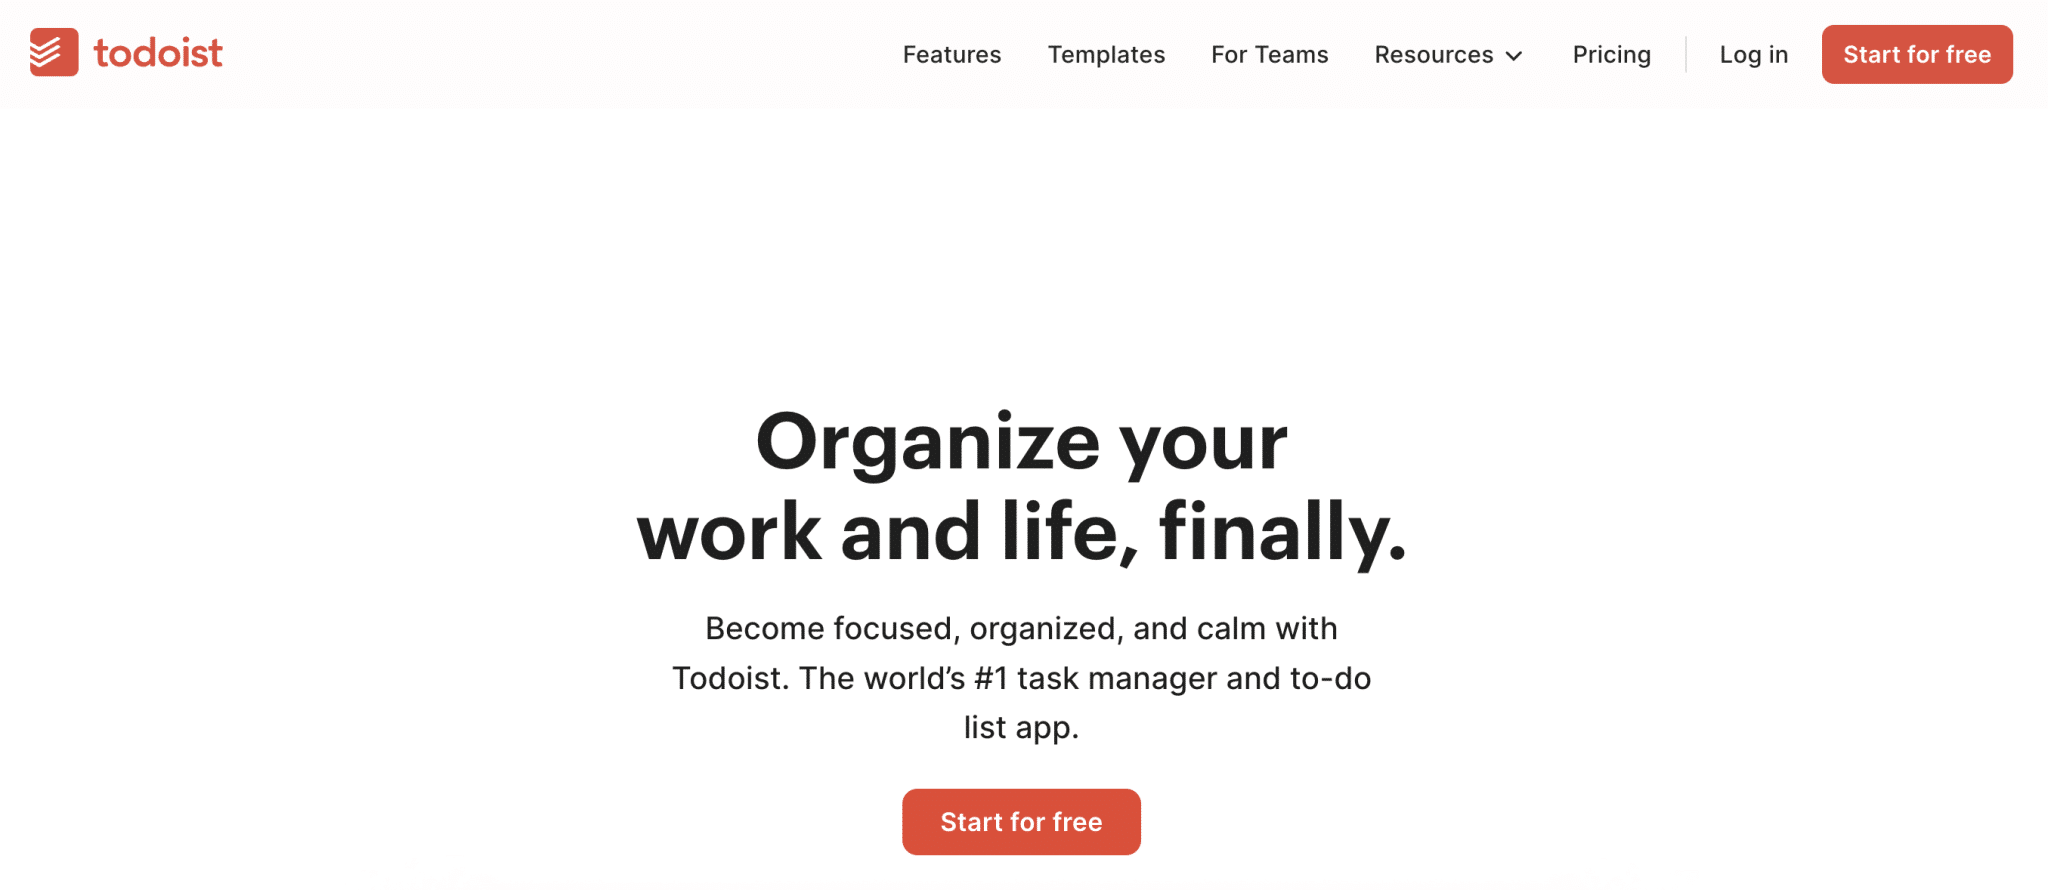 Todoist is a task management tool.